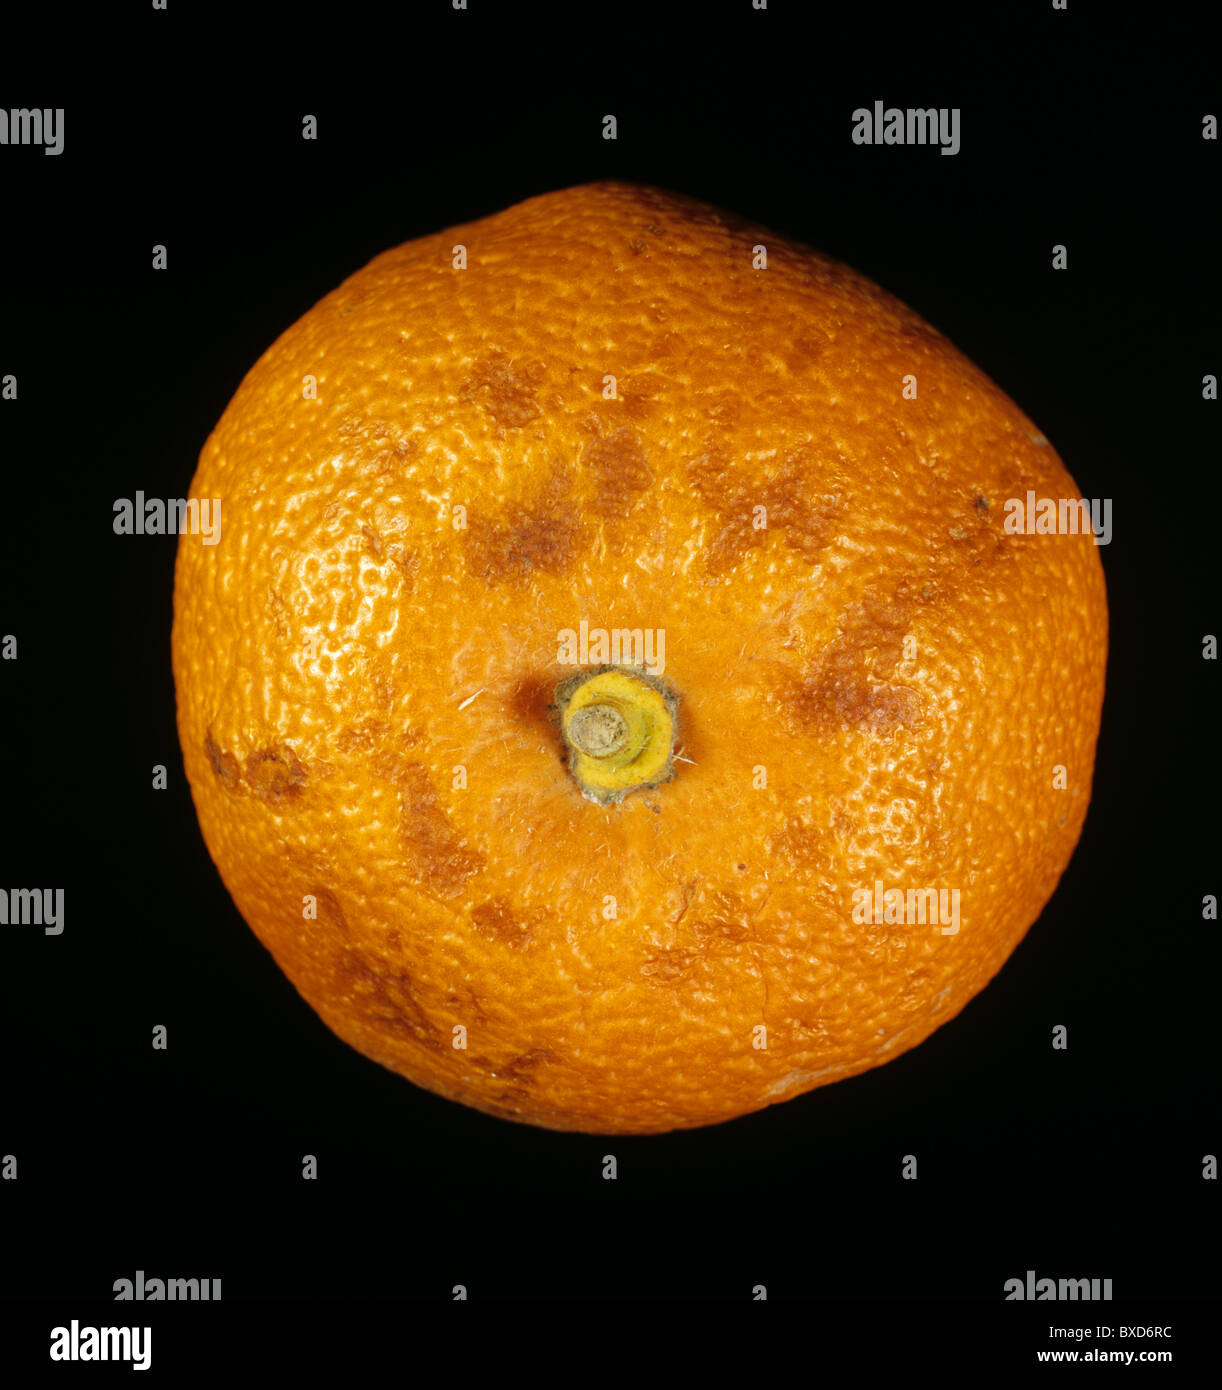 Marks on orange caused by cold injury and low temperatures in store Stock Photo